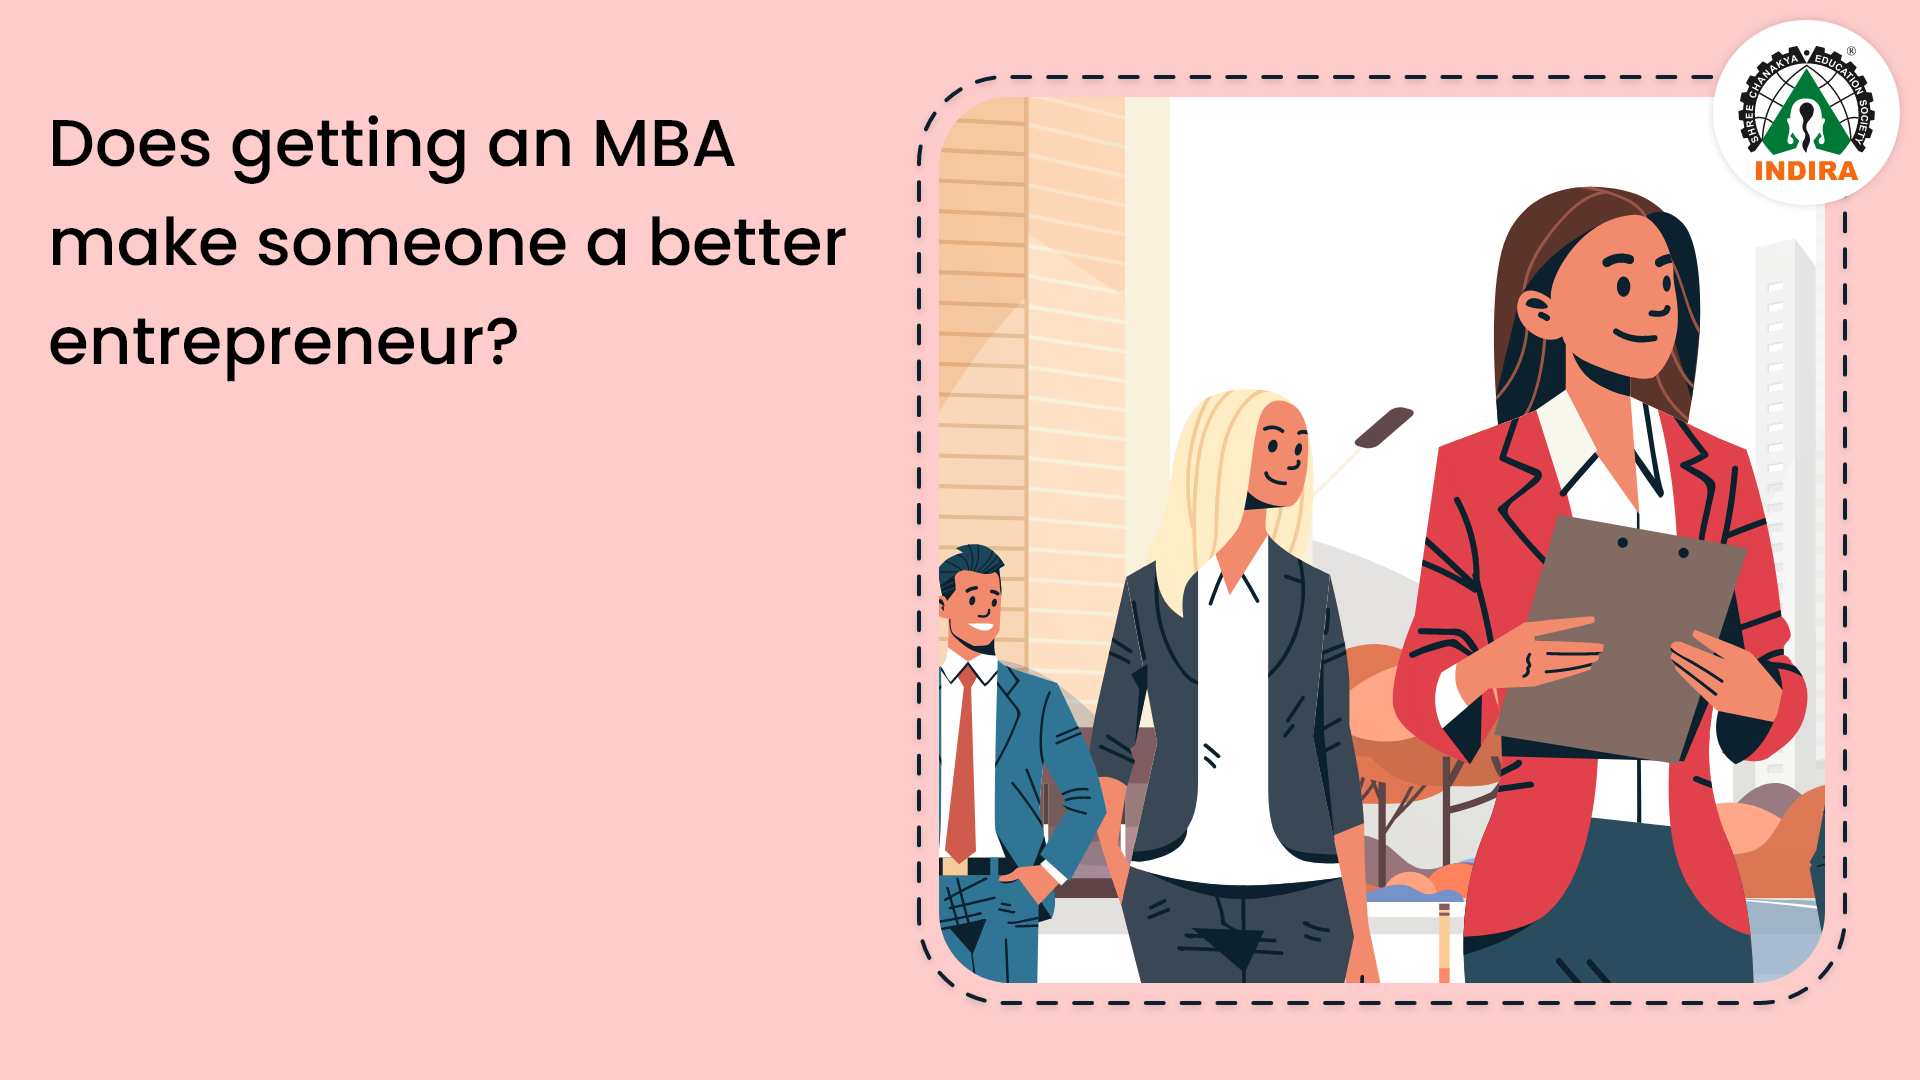 Does getting an MBA make someone a better entrepreneur?